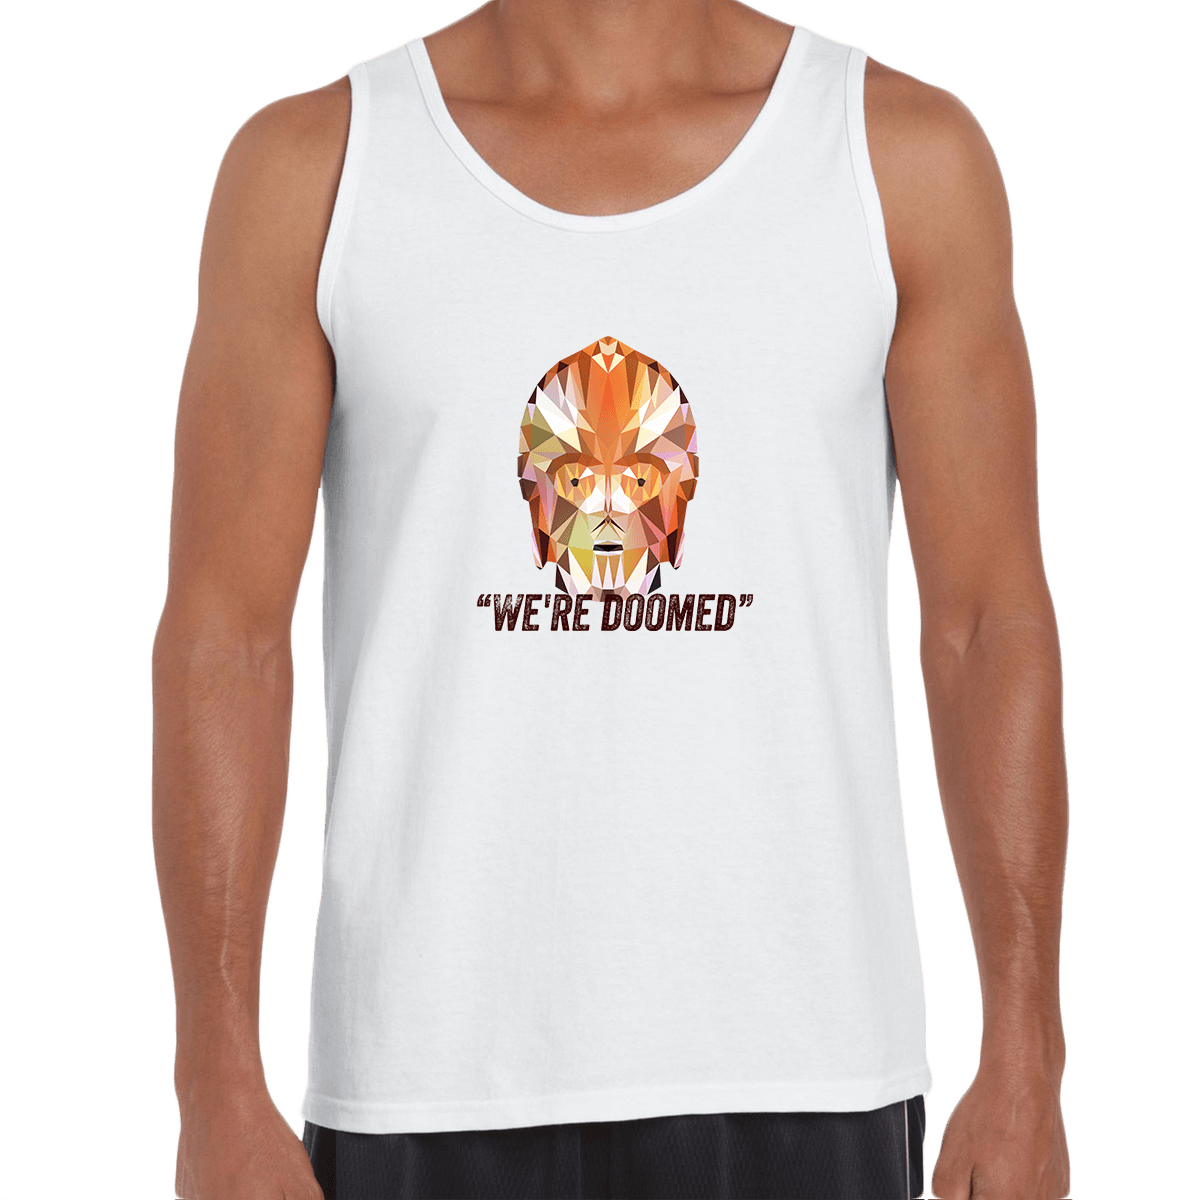 CP3O We are Doomed Tank Top Famous Star Wars character quote - Kuzi Tees